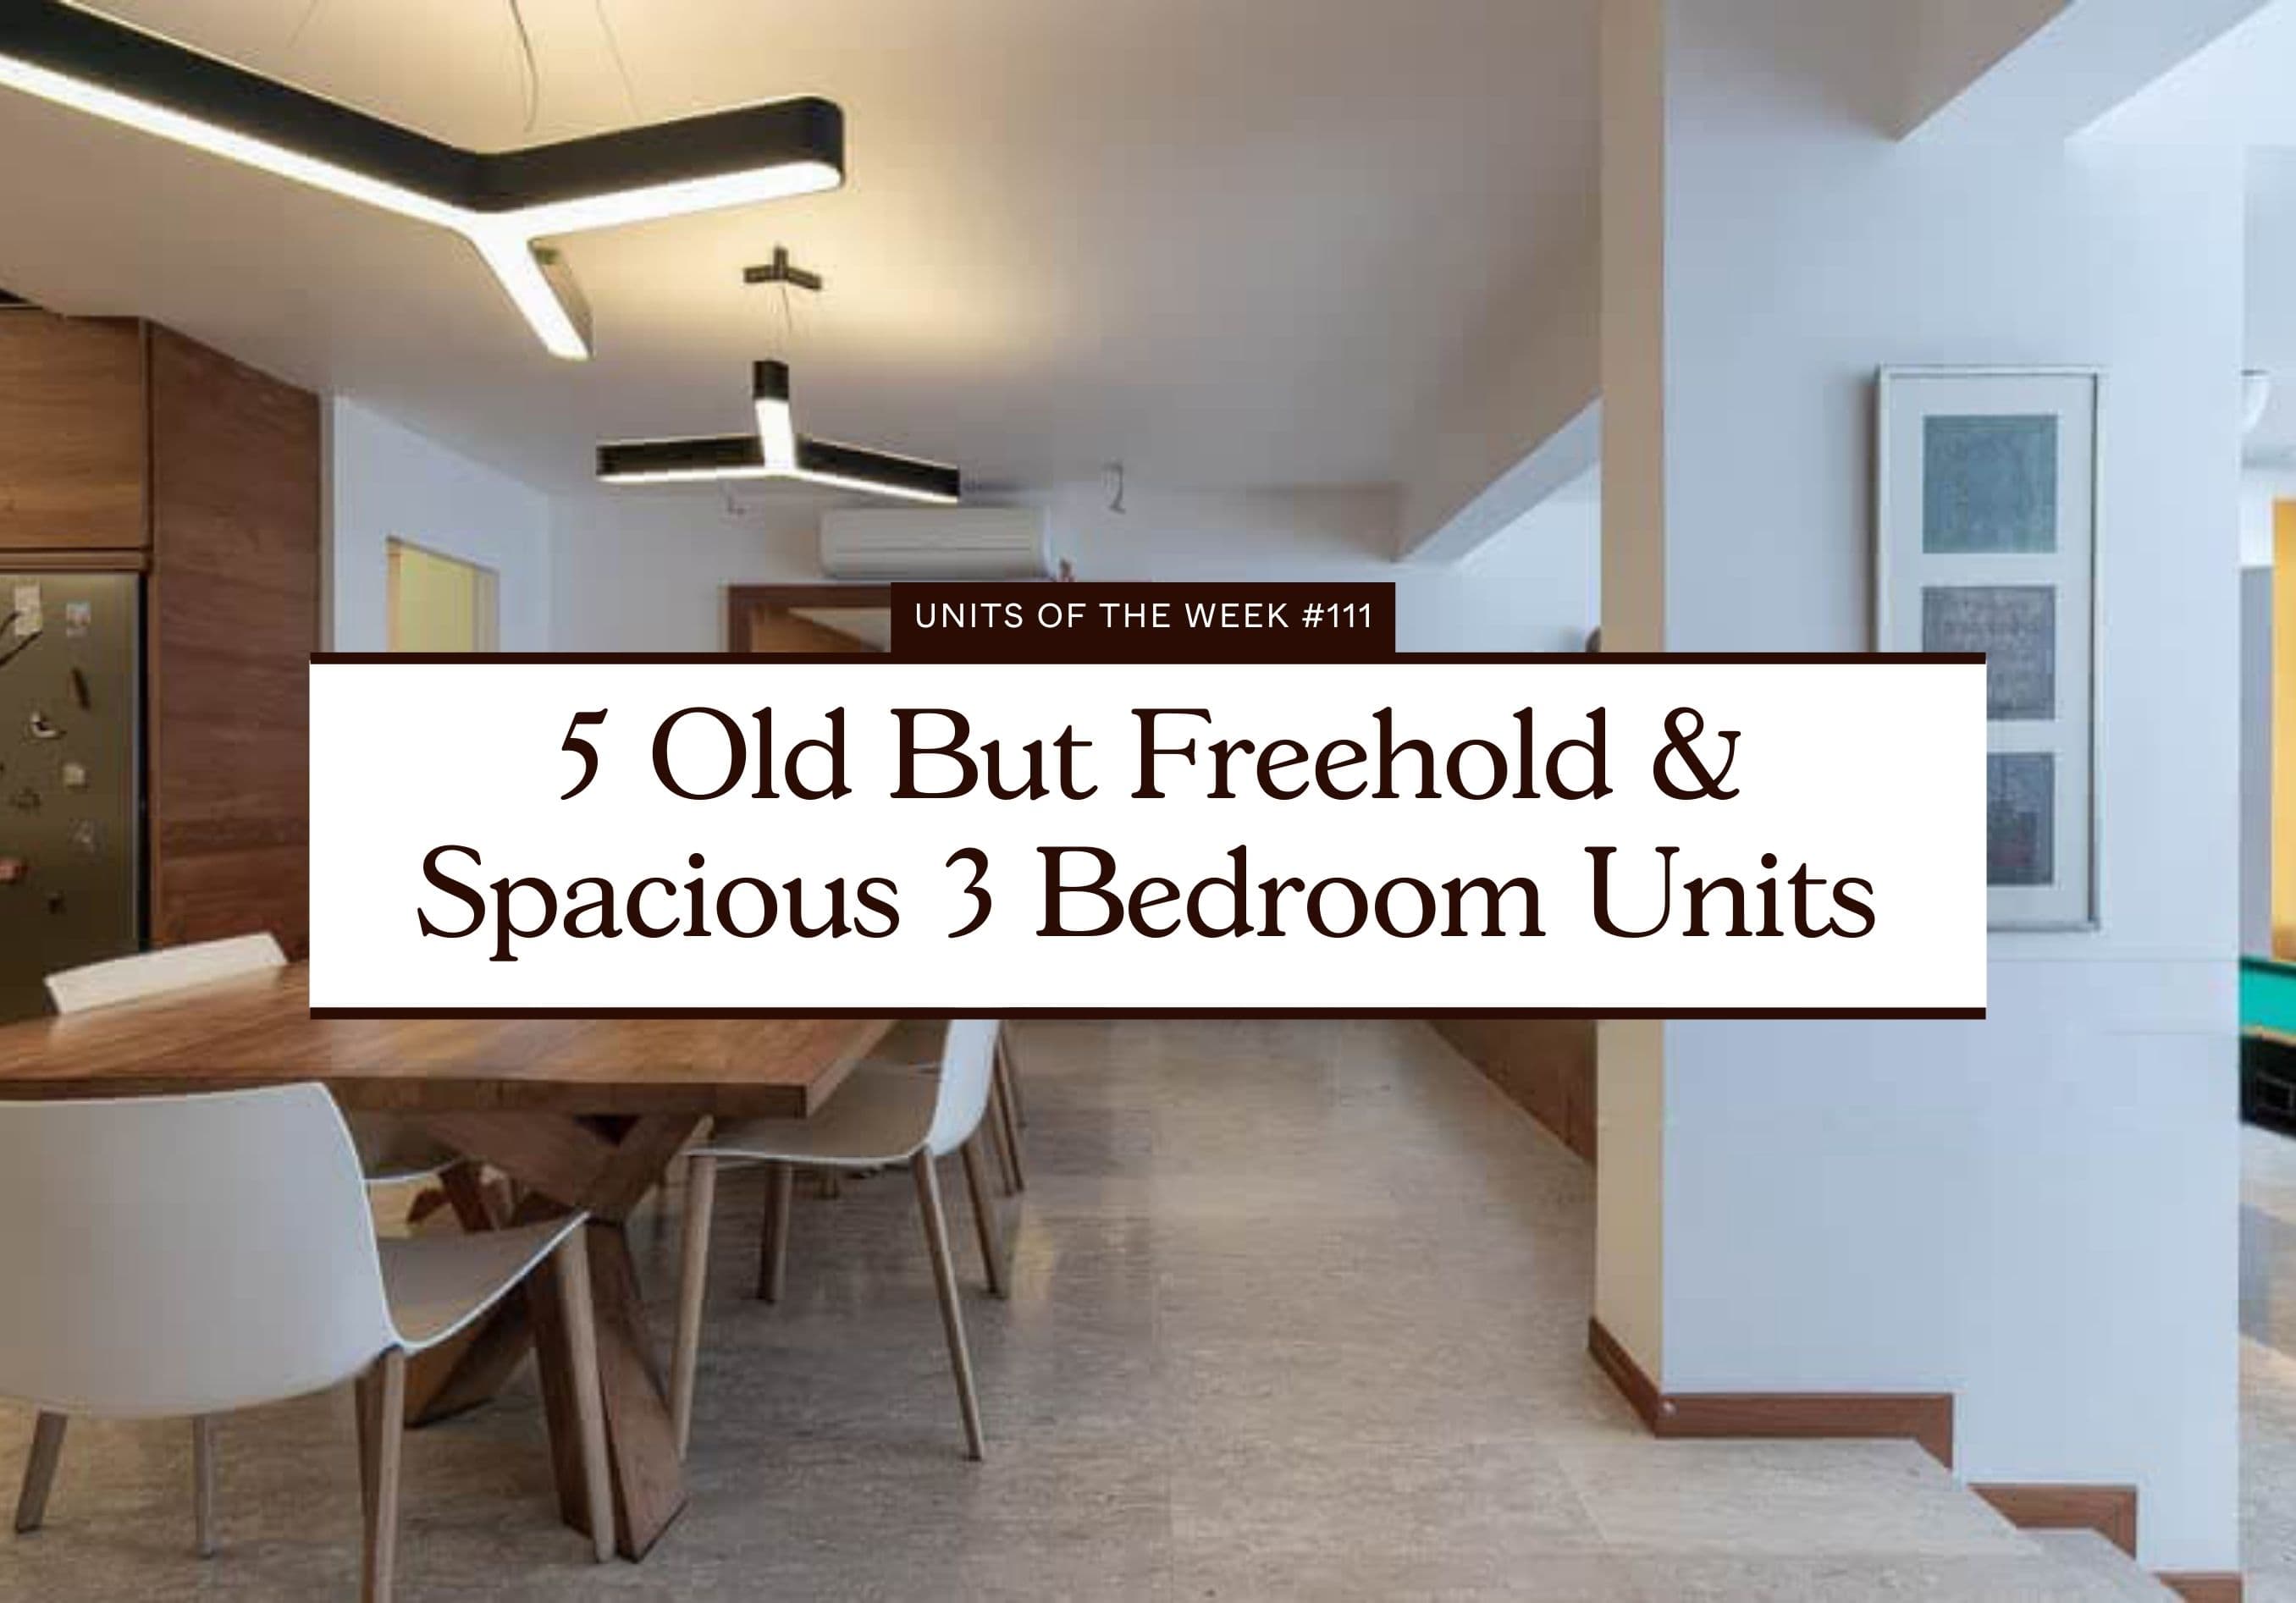 5 Old But Freehold Spacious 3 Bedroom Units